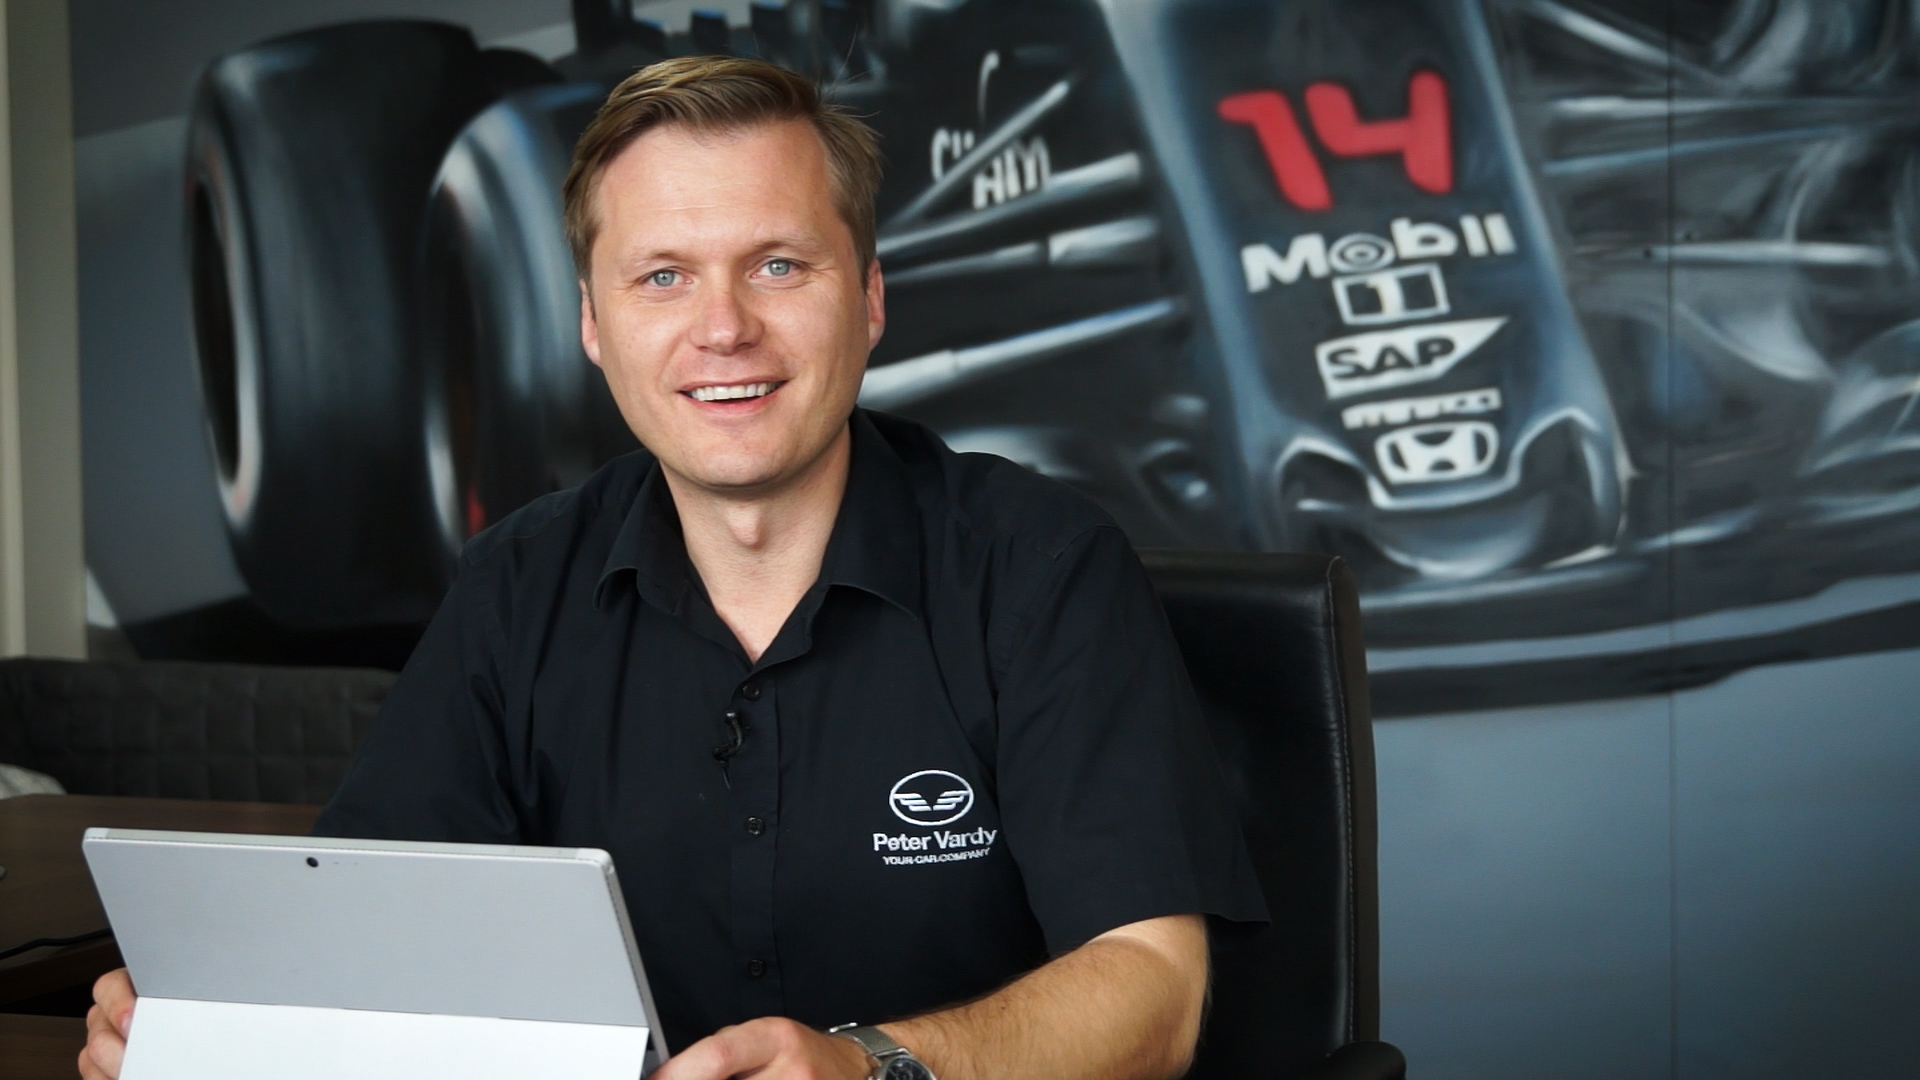 Peter Vardy expands used car operations with new Carz brand